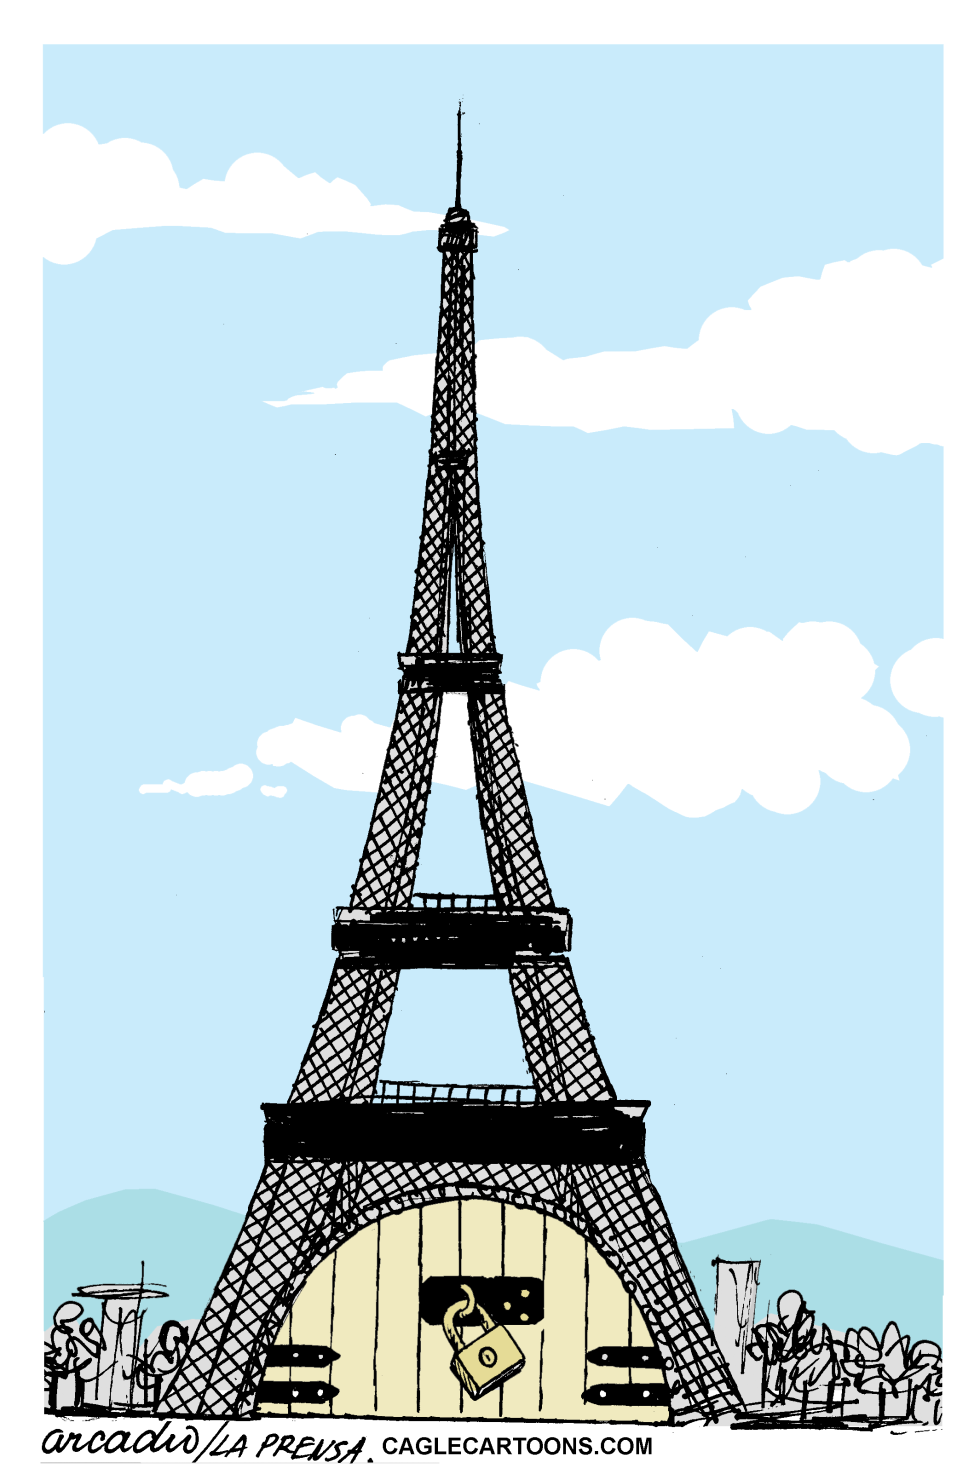 THE IMMIGRATION SUBJECT IN FRANCE   by Arcadio Esquivel